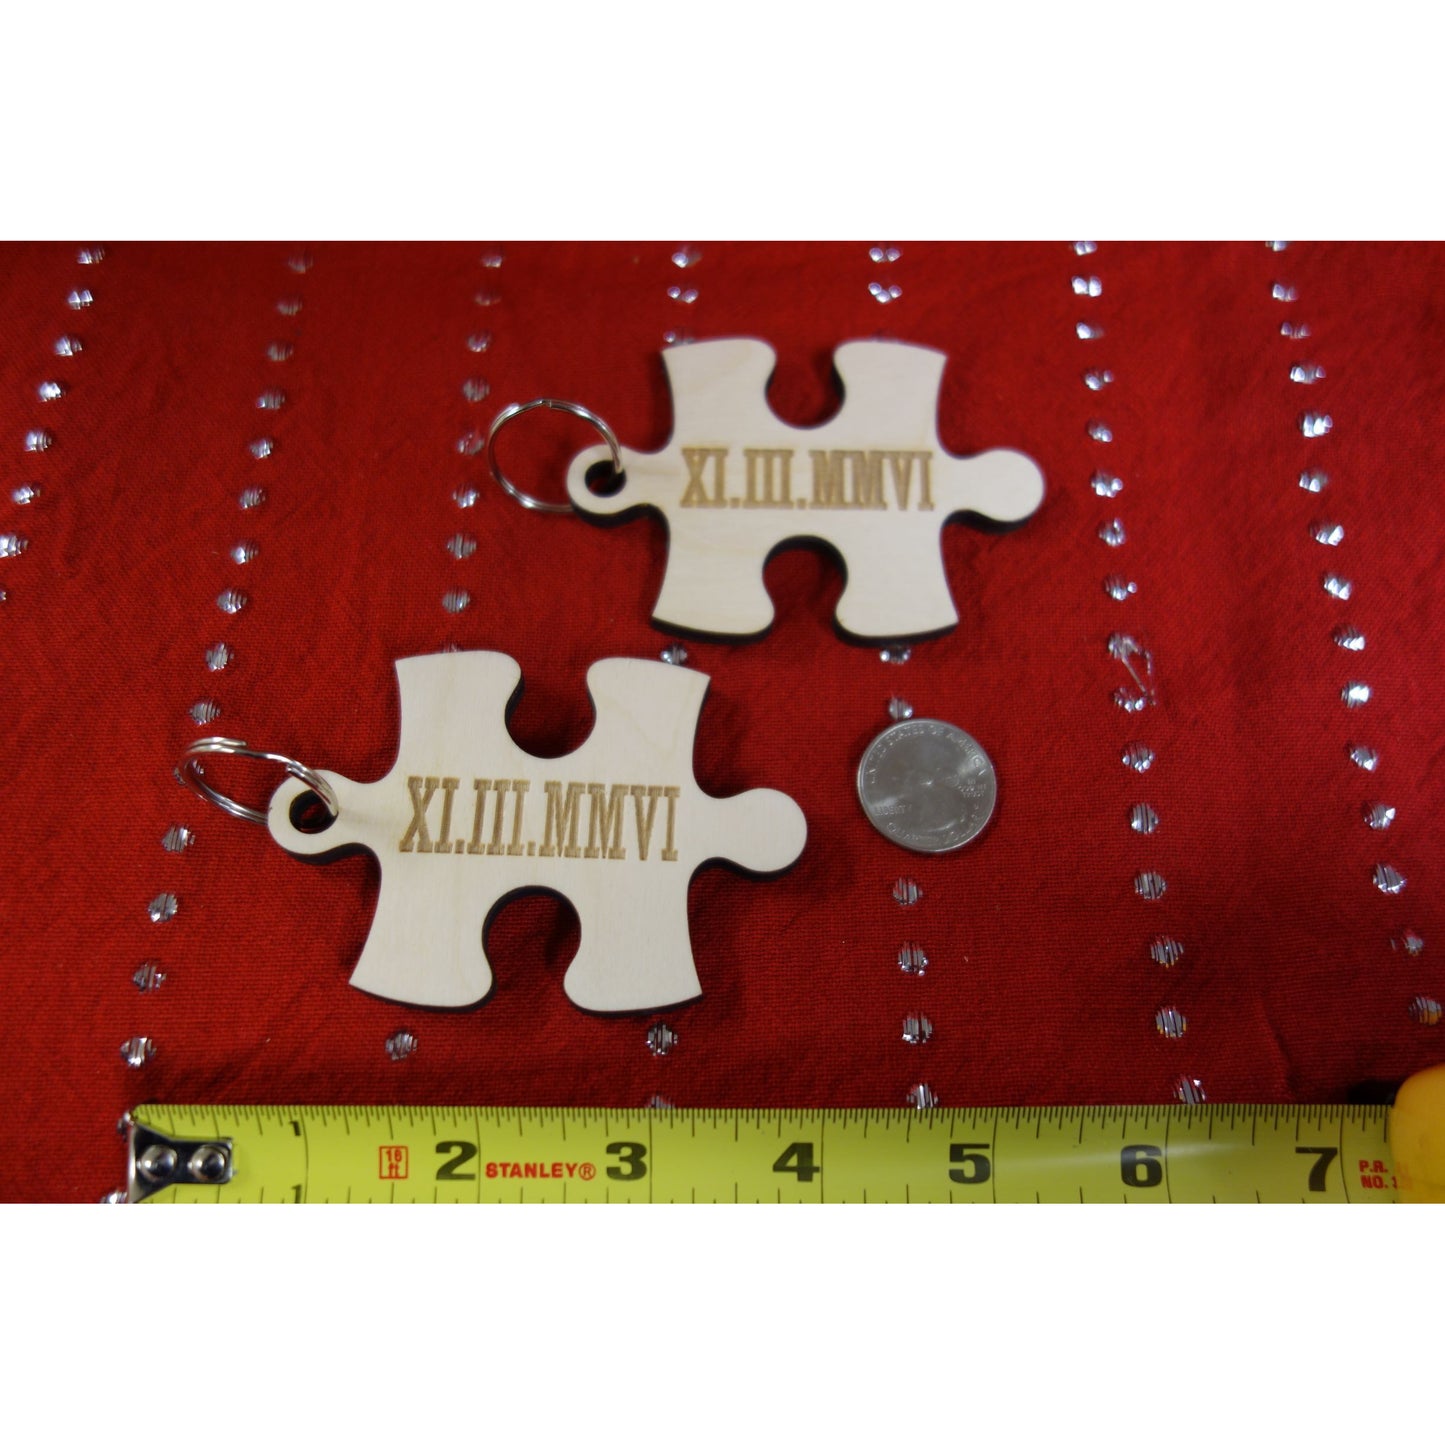 NEW: Personalized Wood Puzzle Piece Matching Key Chain Roman Numeral Date